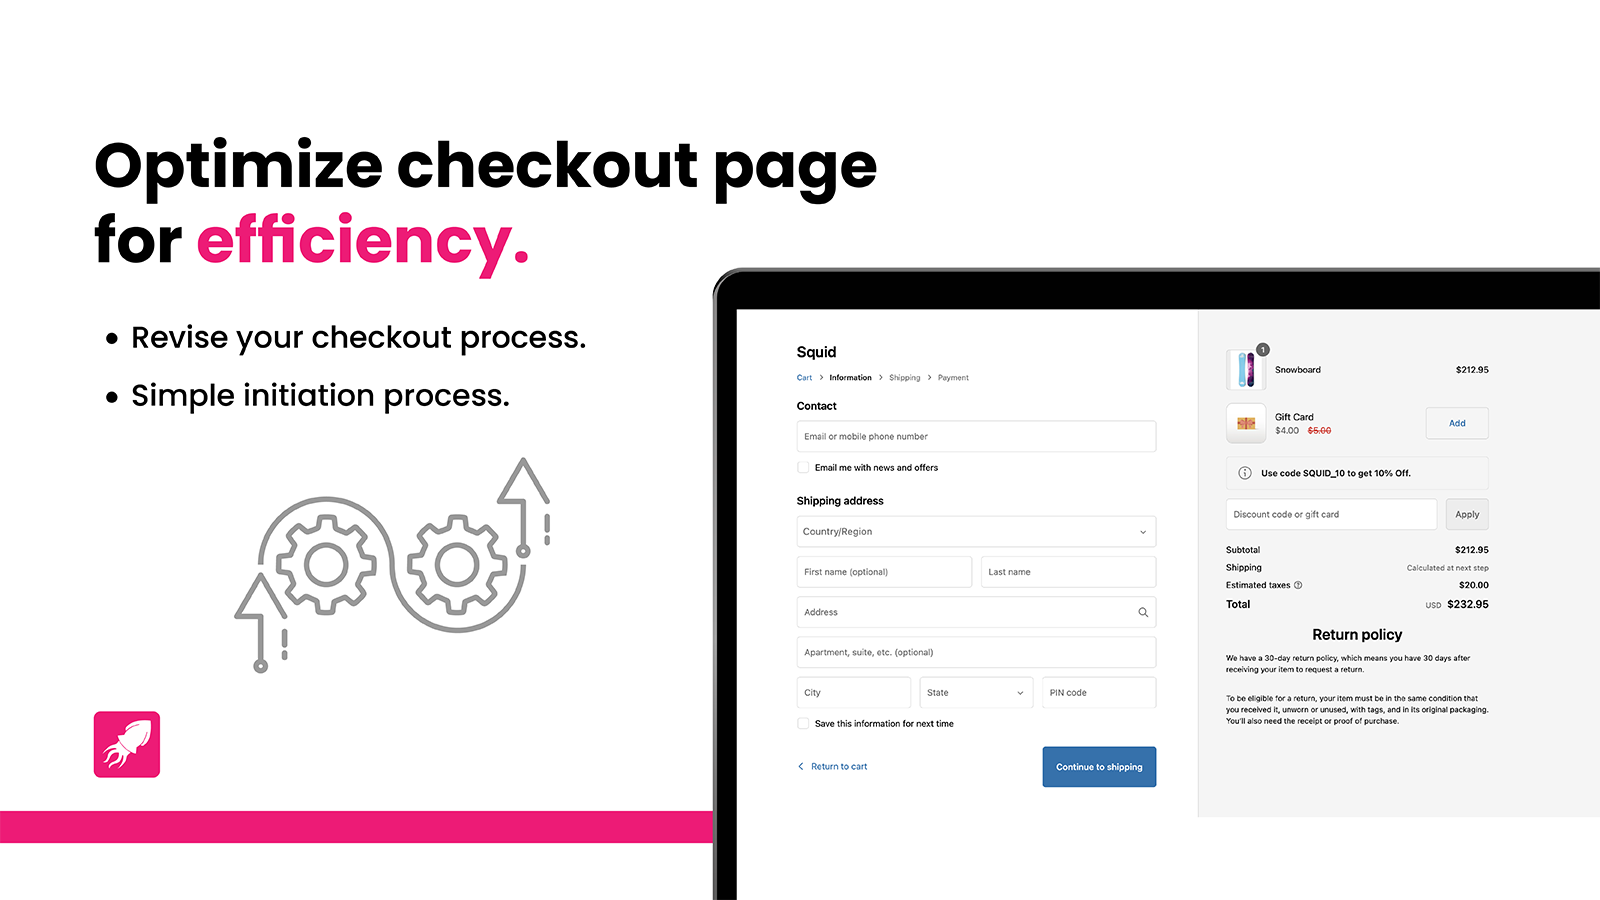 Optimize checkout page for efficiency